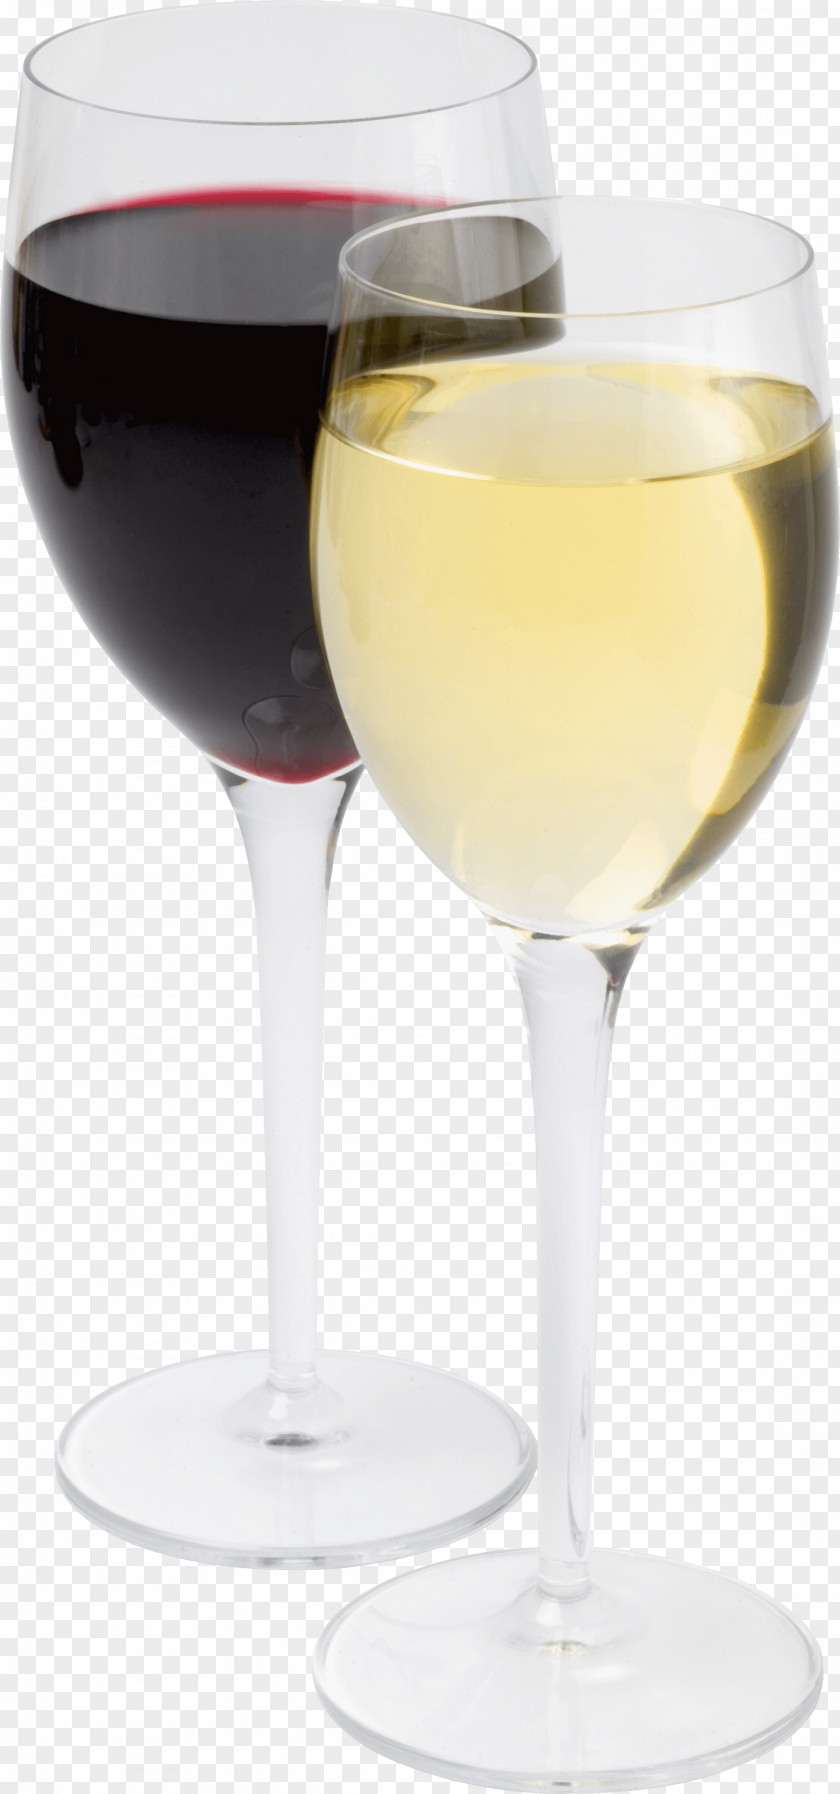 Glass Image Wine Champagne Drink Cup PNG